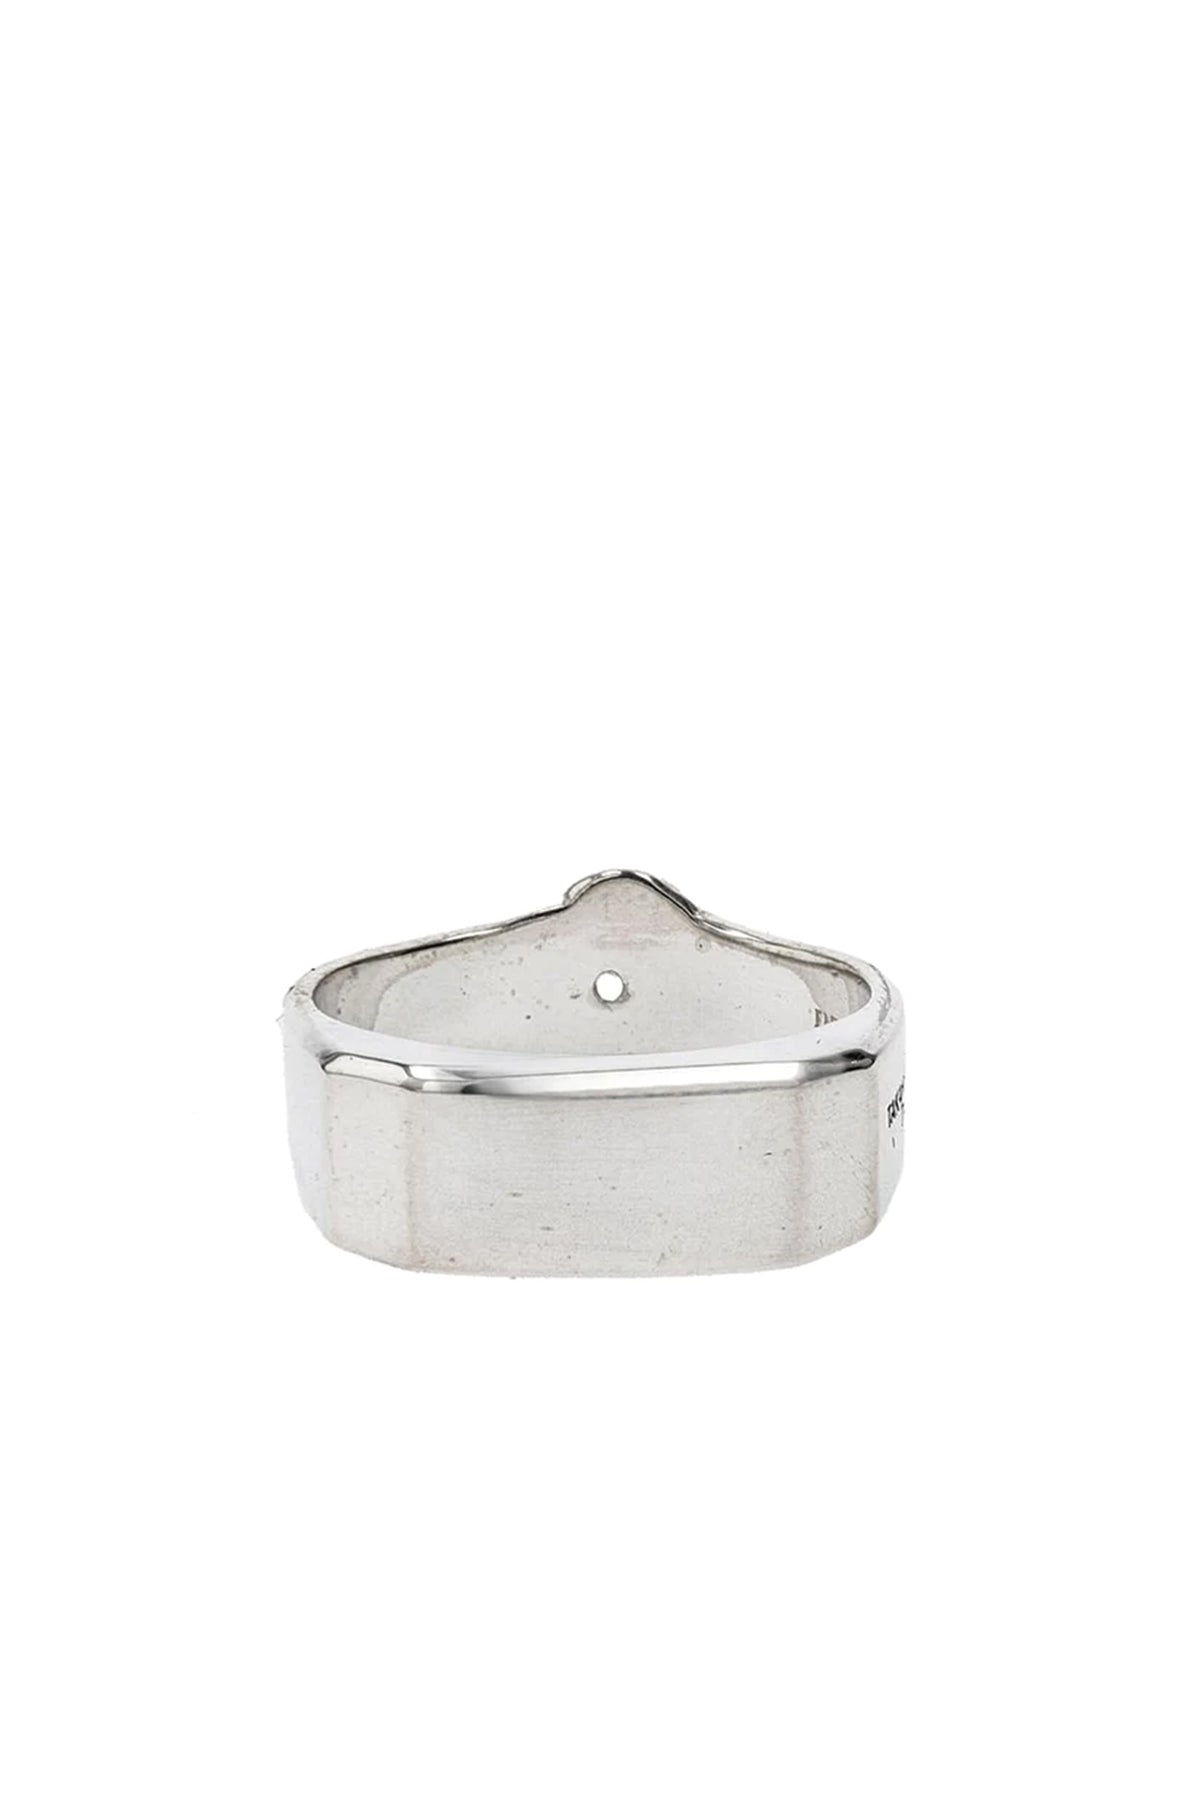 BORN SHAPED SIGNET RING.-S- / SIL